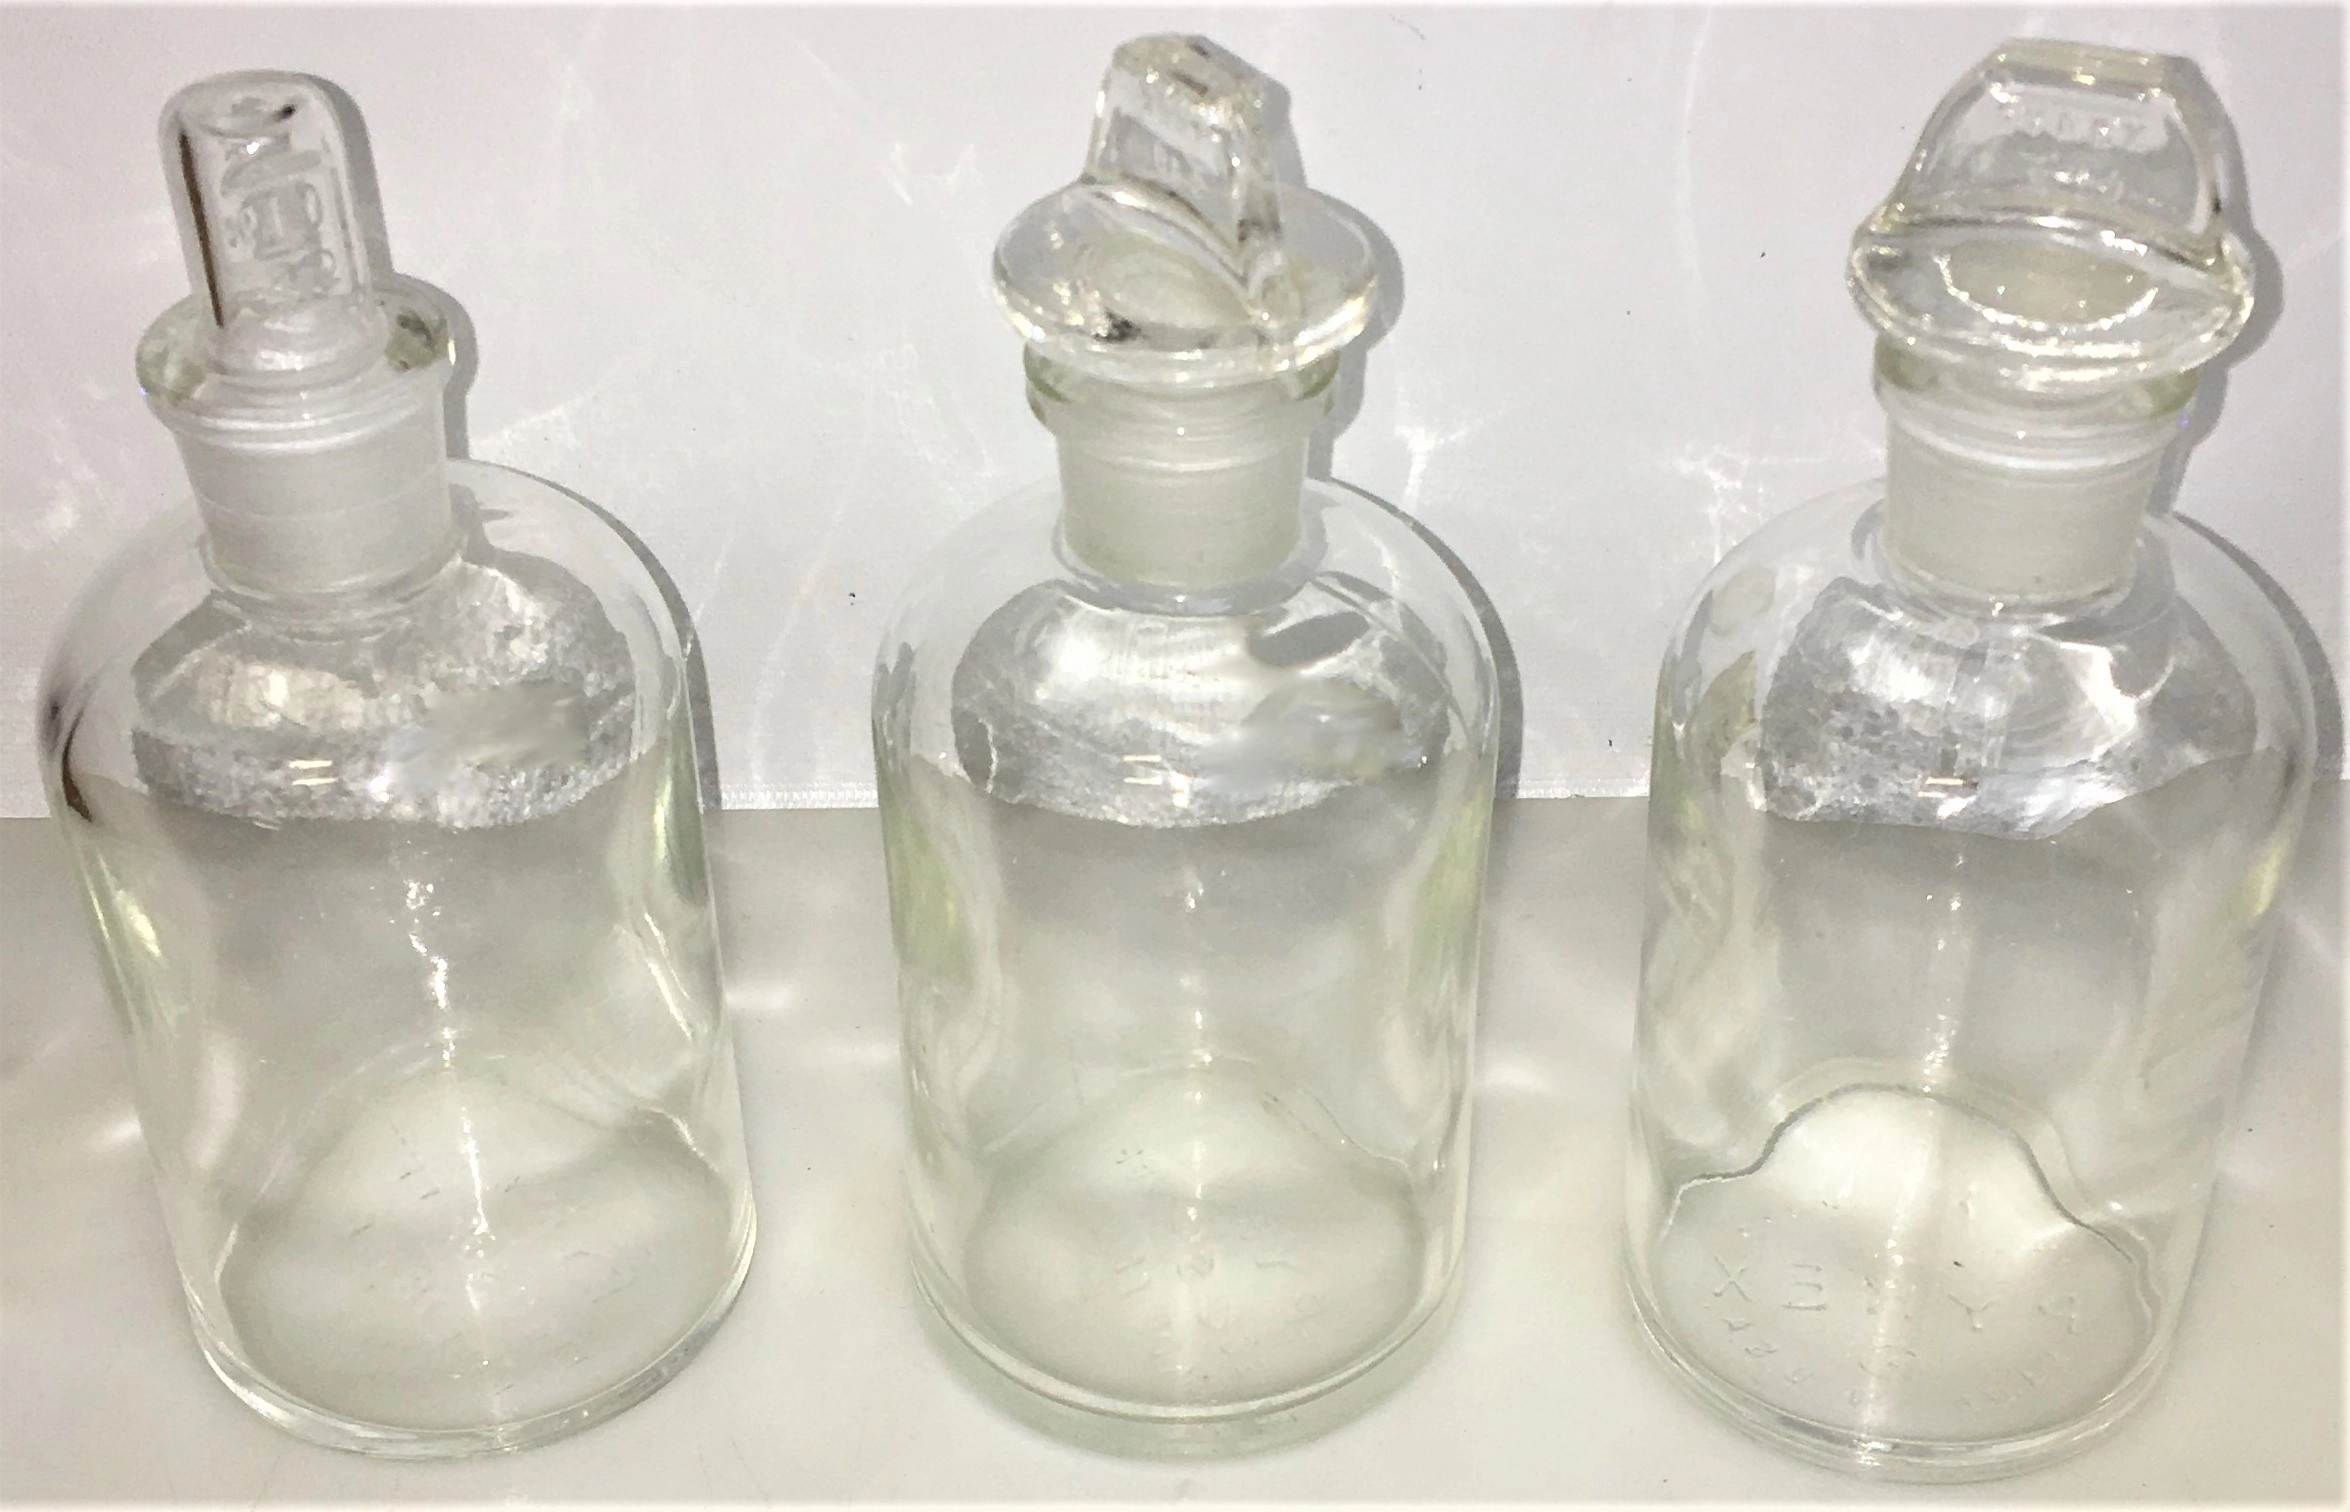 Corning PYREX 1500-250 Reagent Storage Bottle with Stopper - 250mL